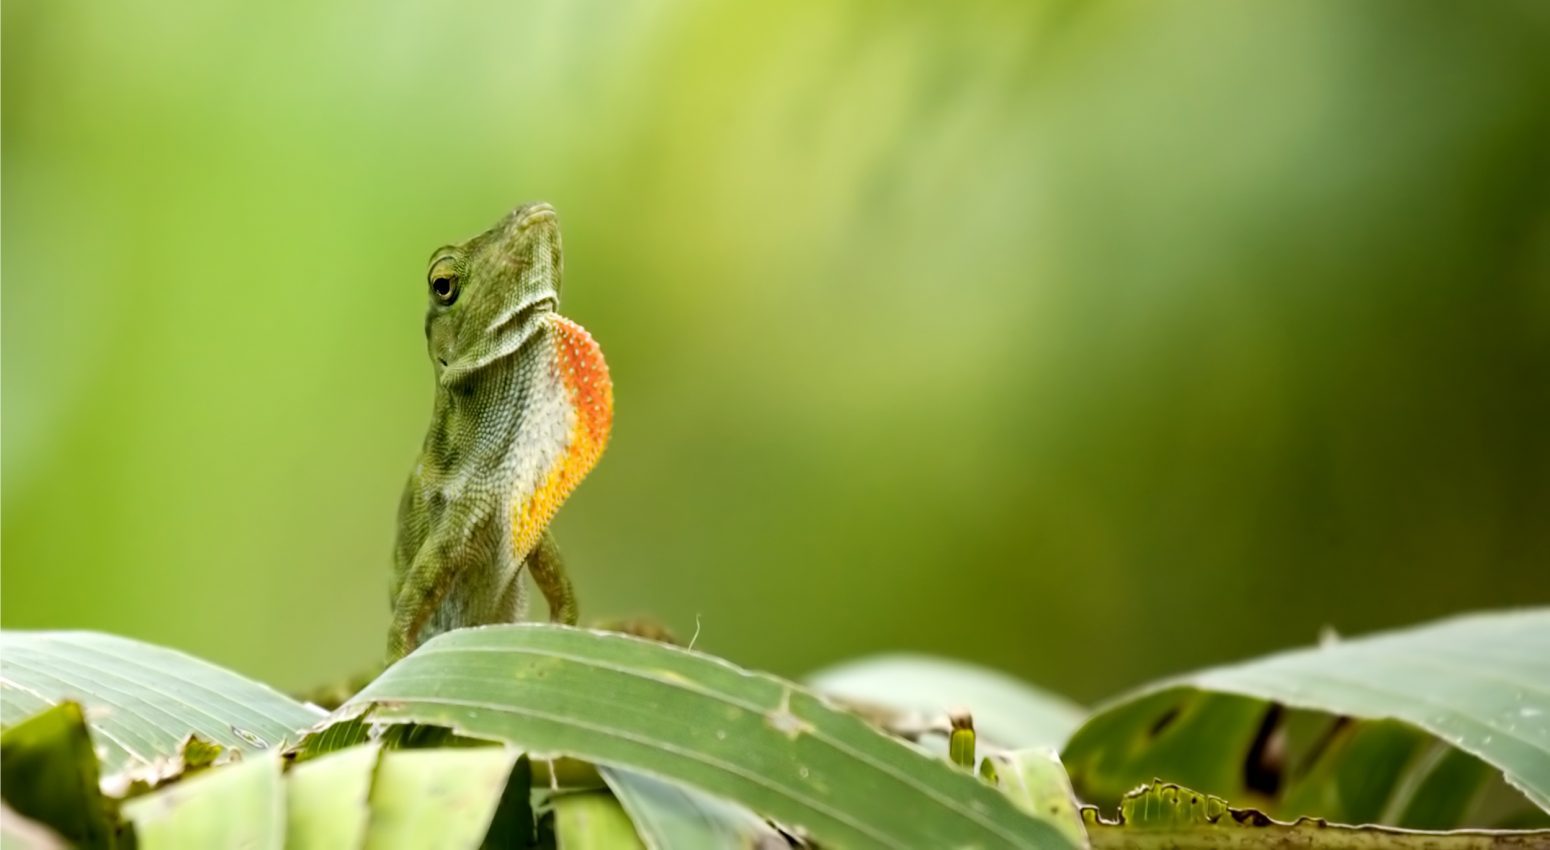 A lizard sitting on a branch with a green background